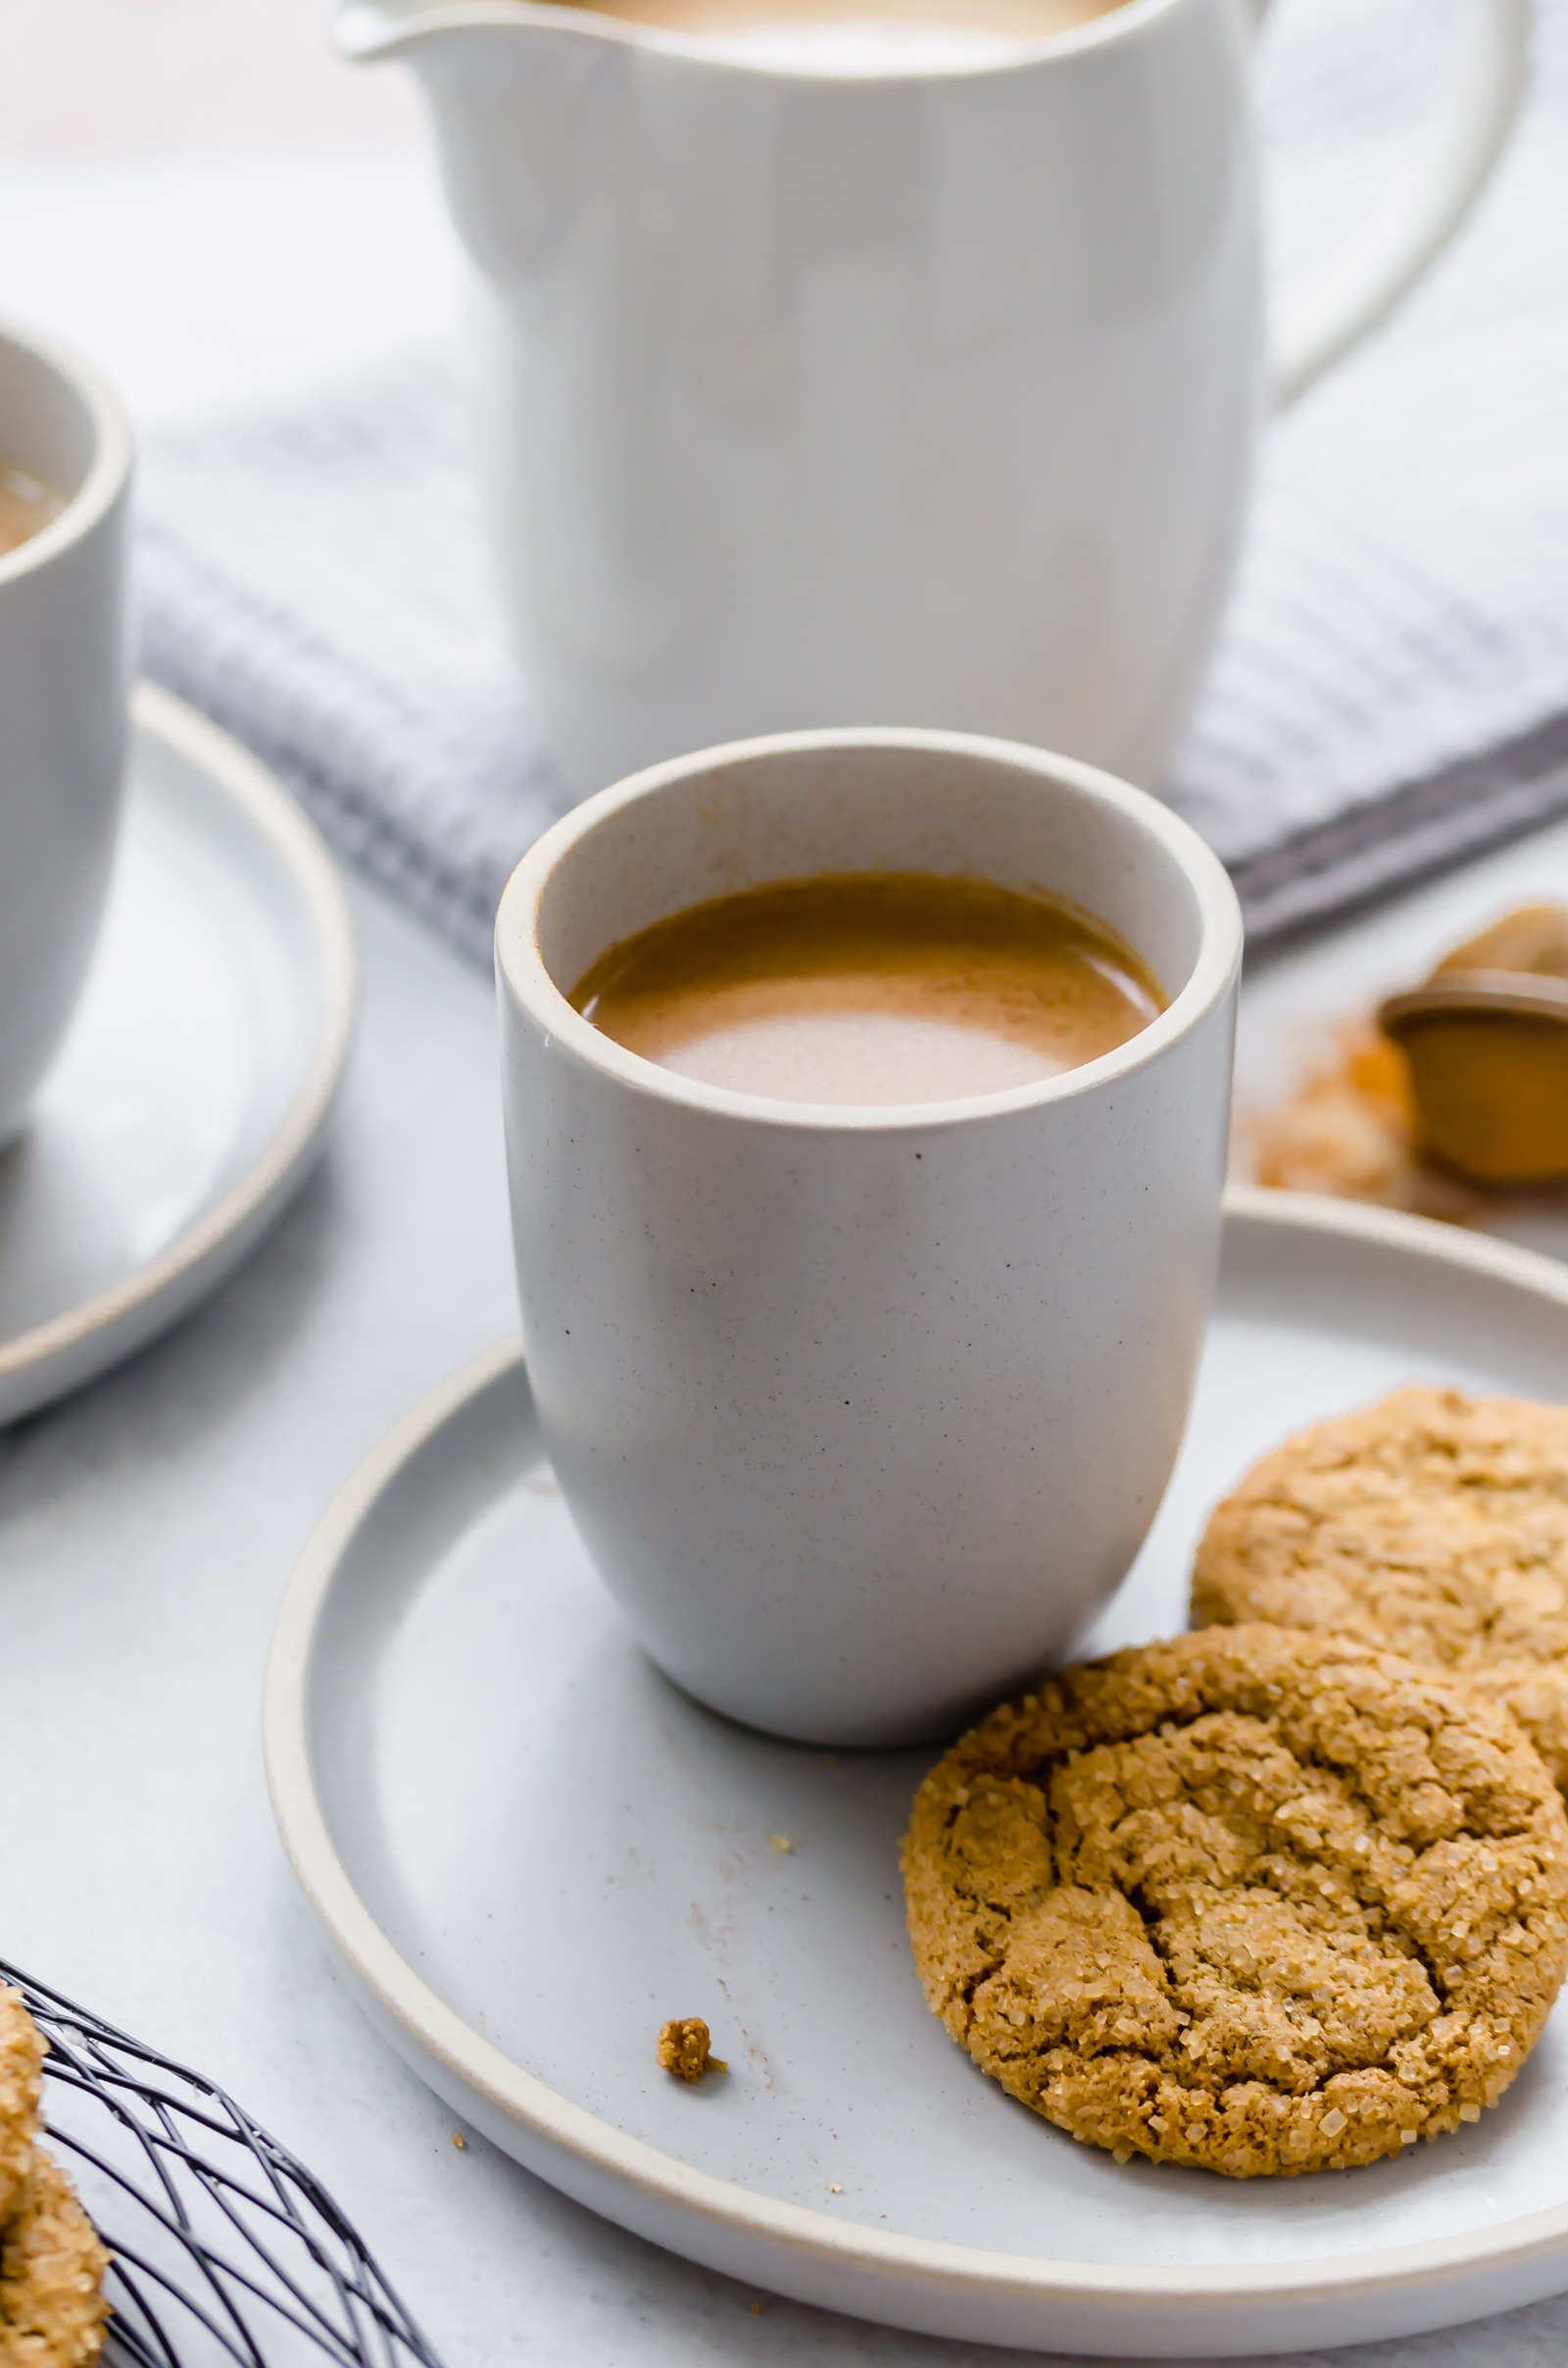 A mug of crock pot pumpkin spiced latte with two cookie on a plate next to it.